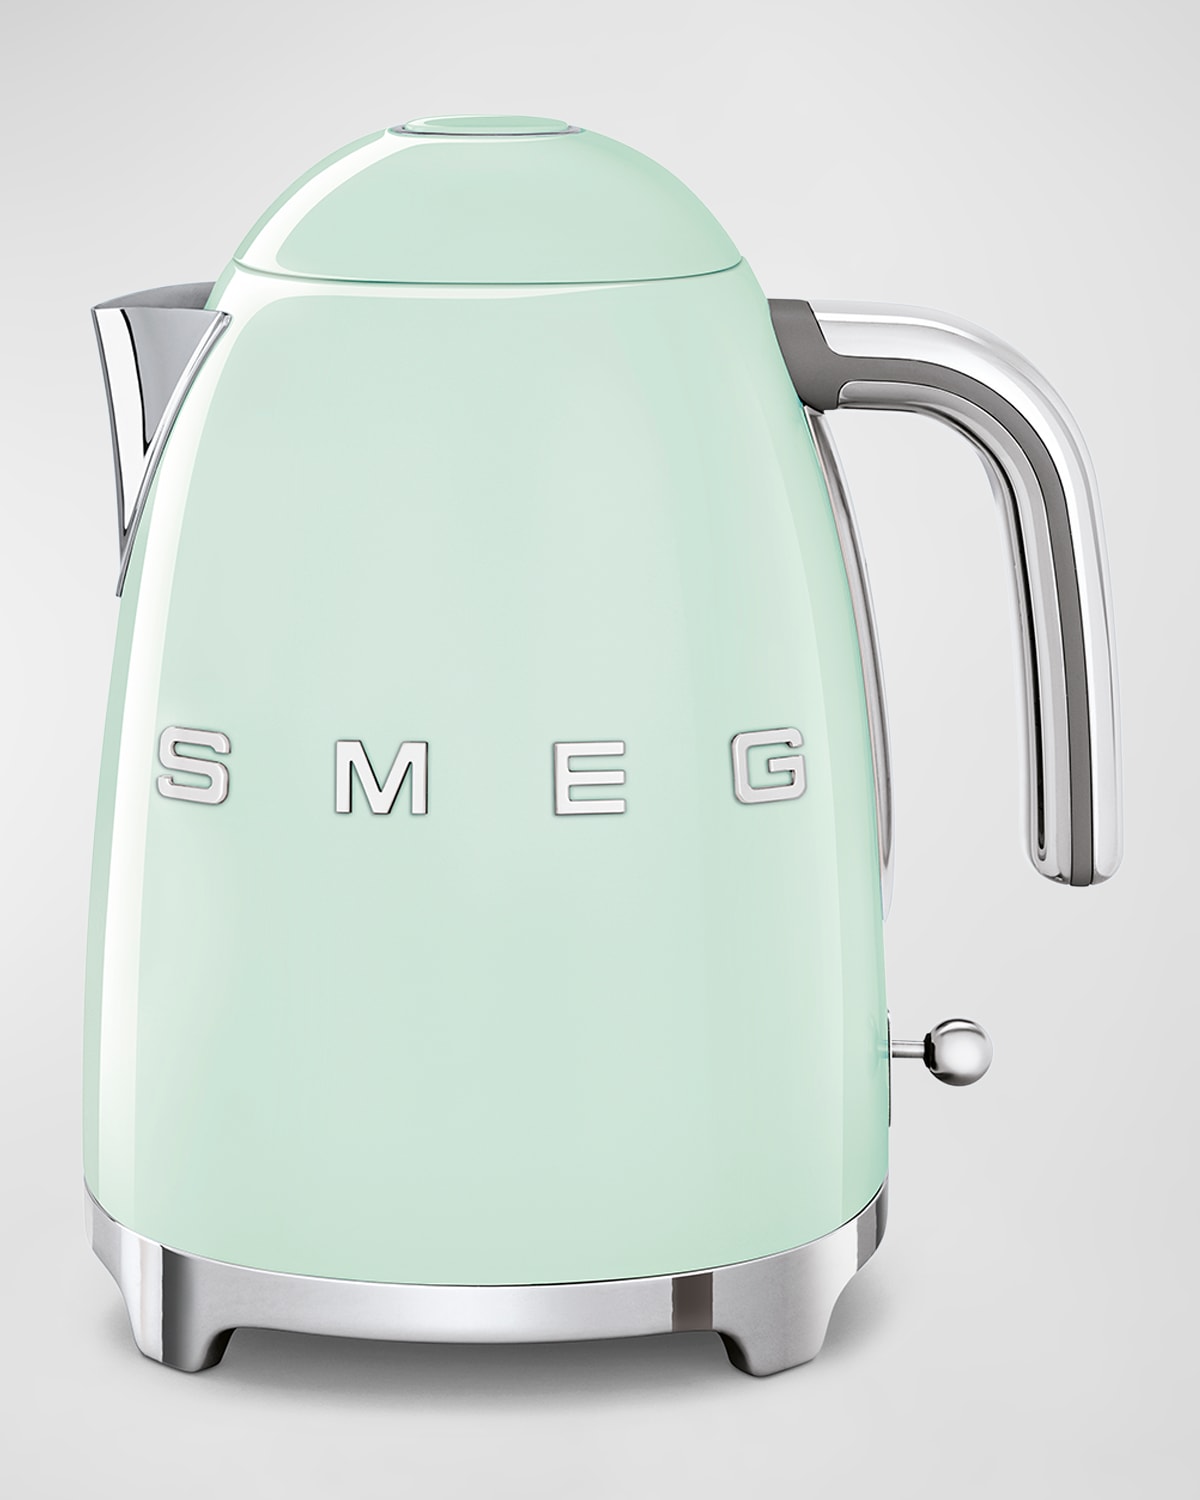 Smeg Retro Electric Kettle, Polished White In Pastel Green